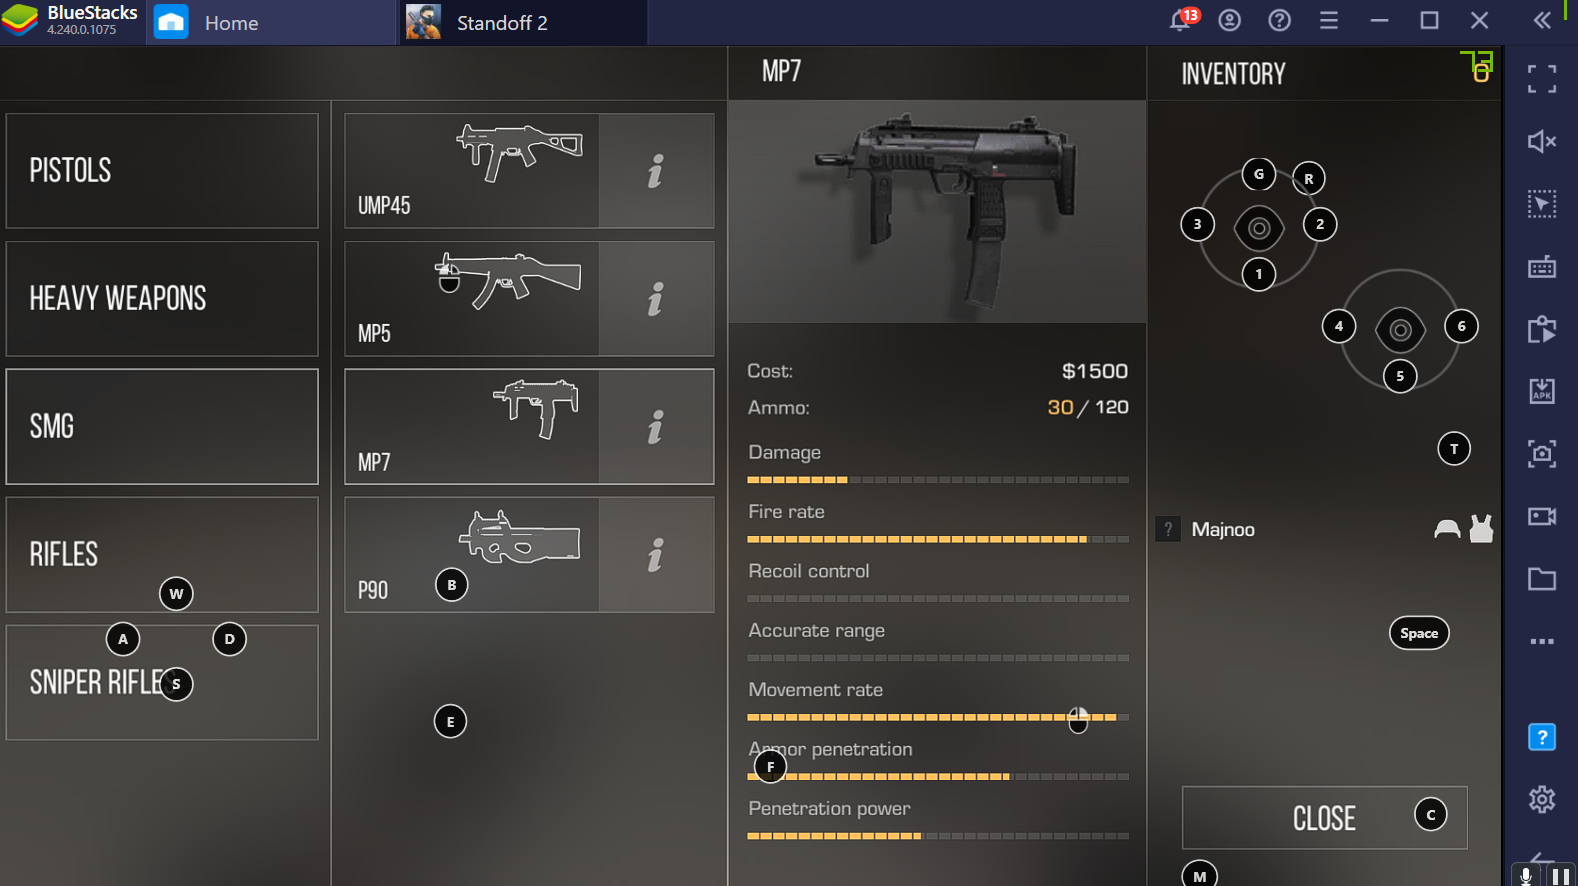 Lurker Guide for Standoff 2 on PC with BlueStacks